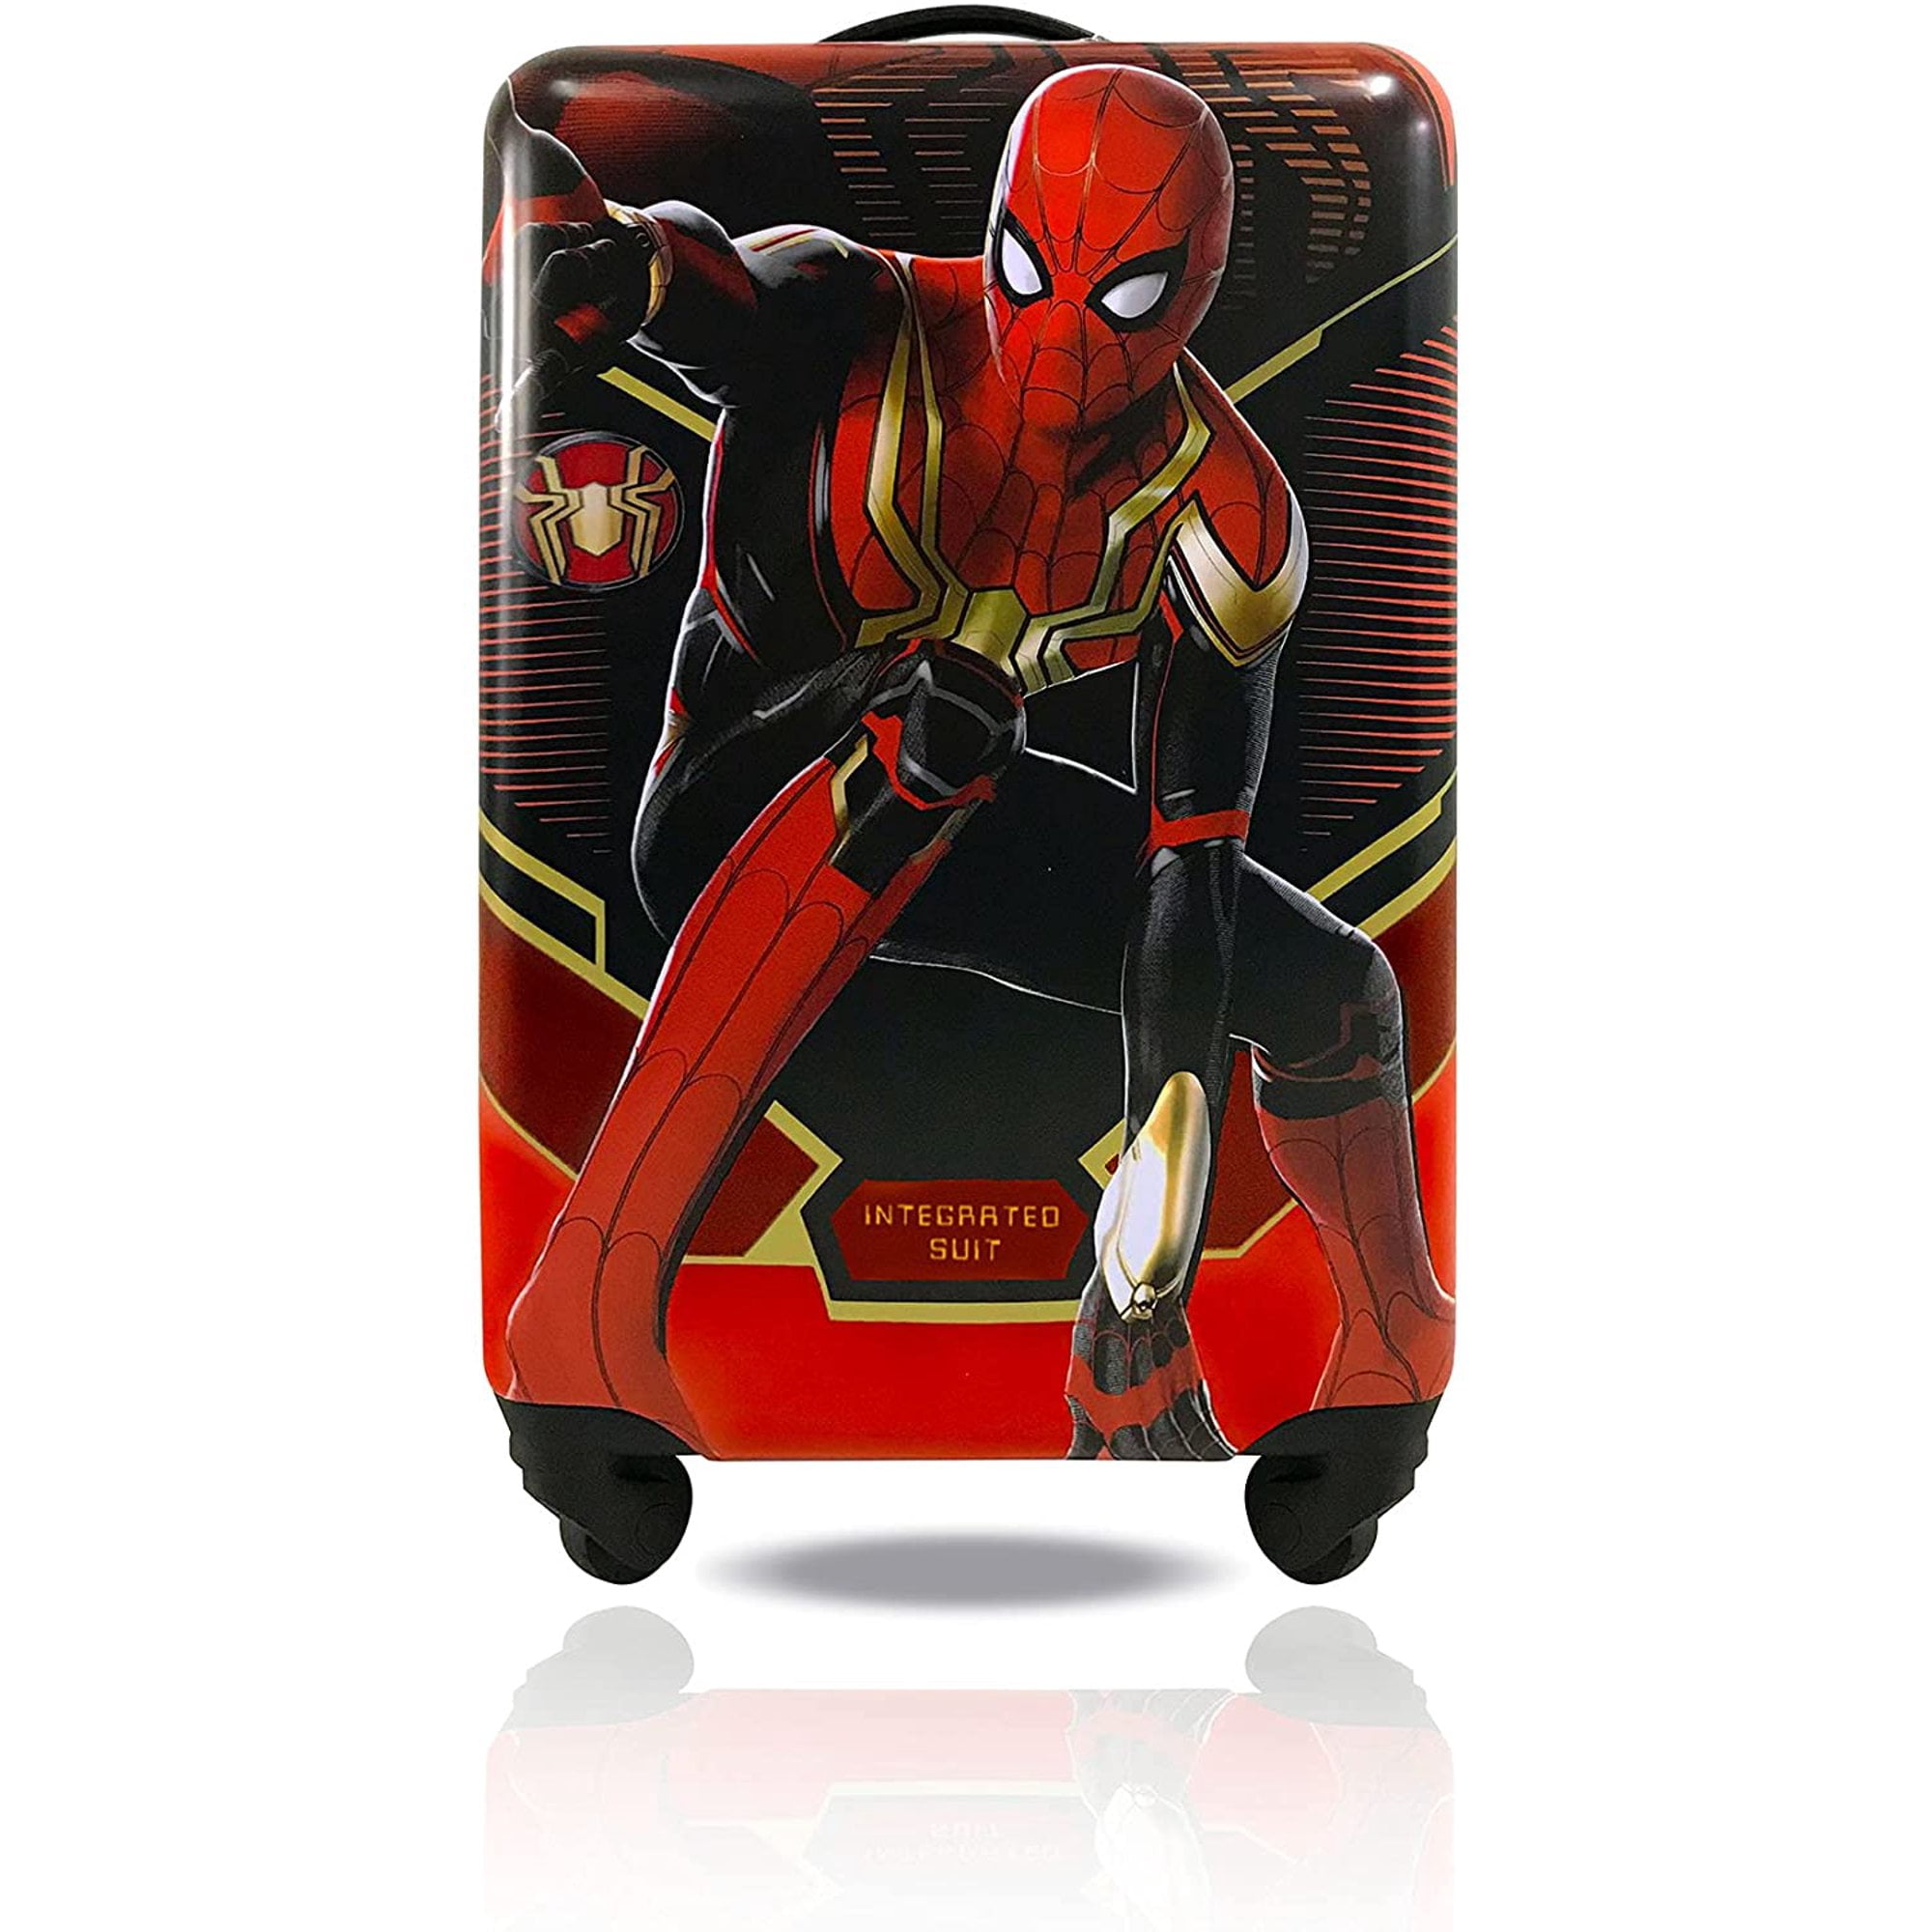 Spiderman No Way Home Hard-Sided Inches Luggage Suitcase Trolley Carry-On Spinner Rolling Kids Tween Travel for 20